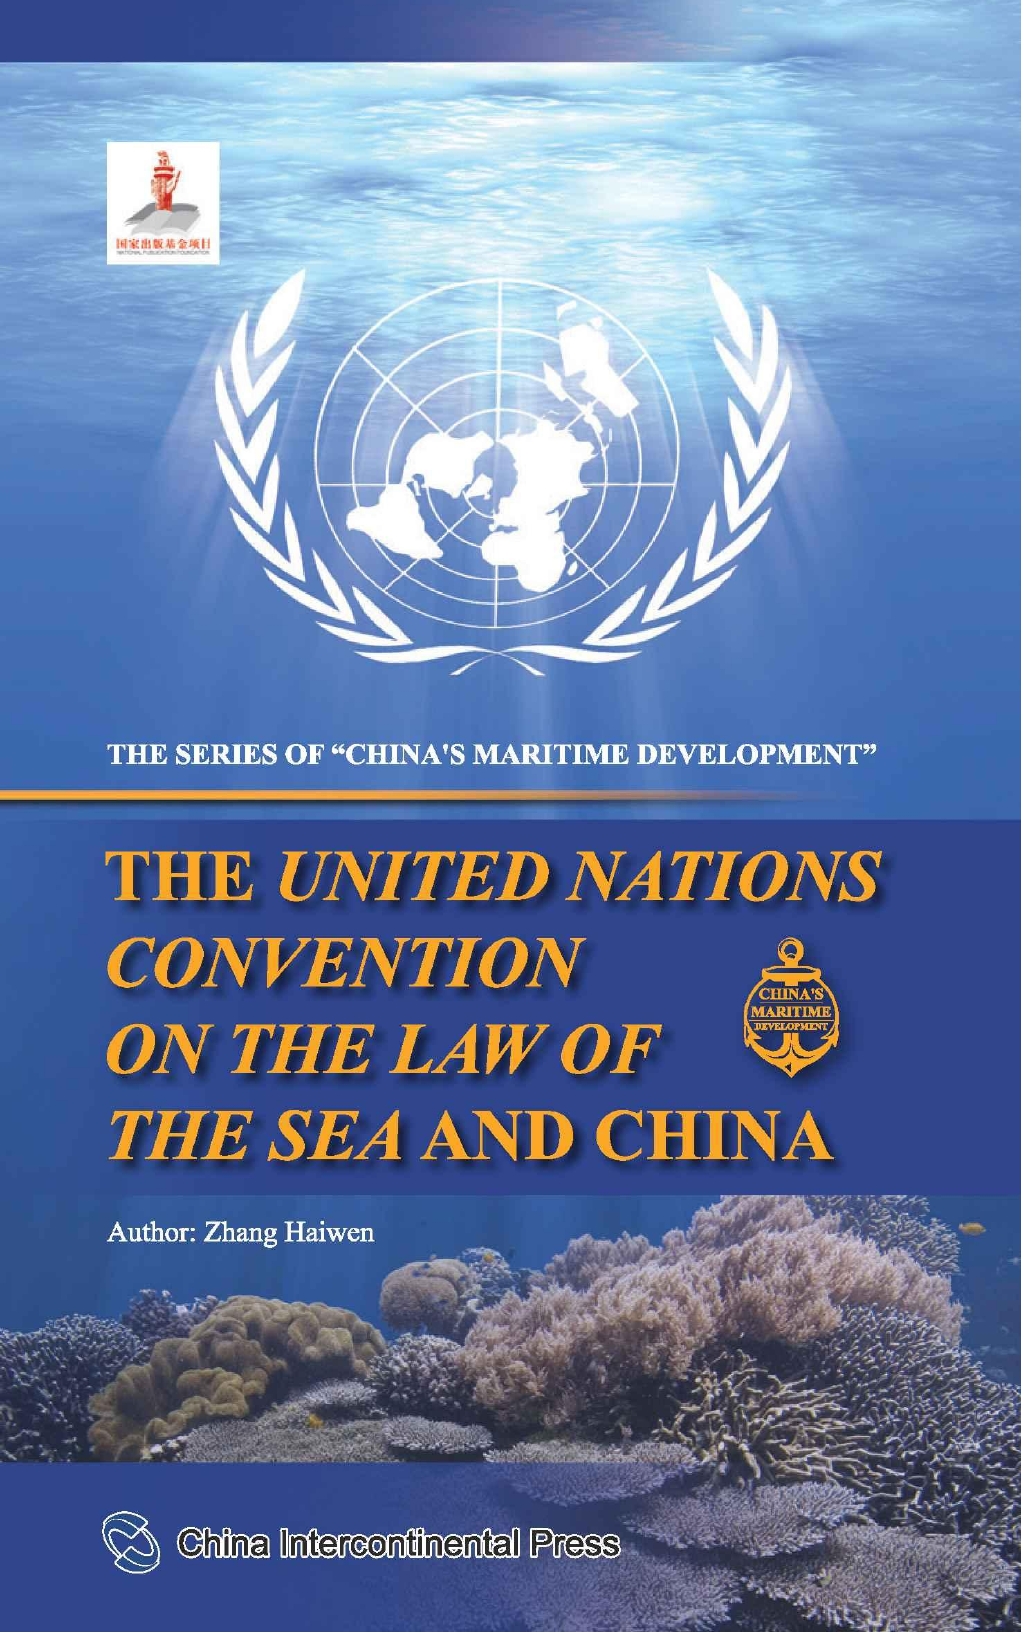 The United Nations Convention on the Law of the Sea and China